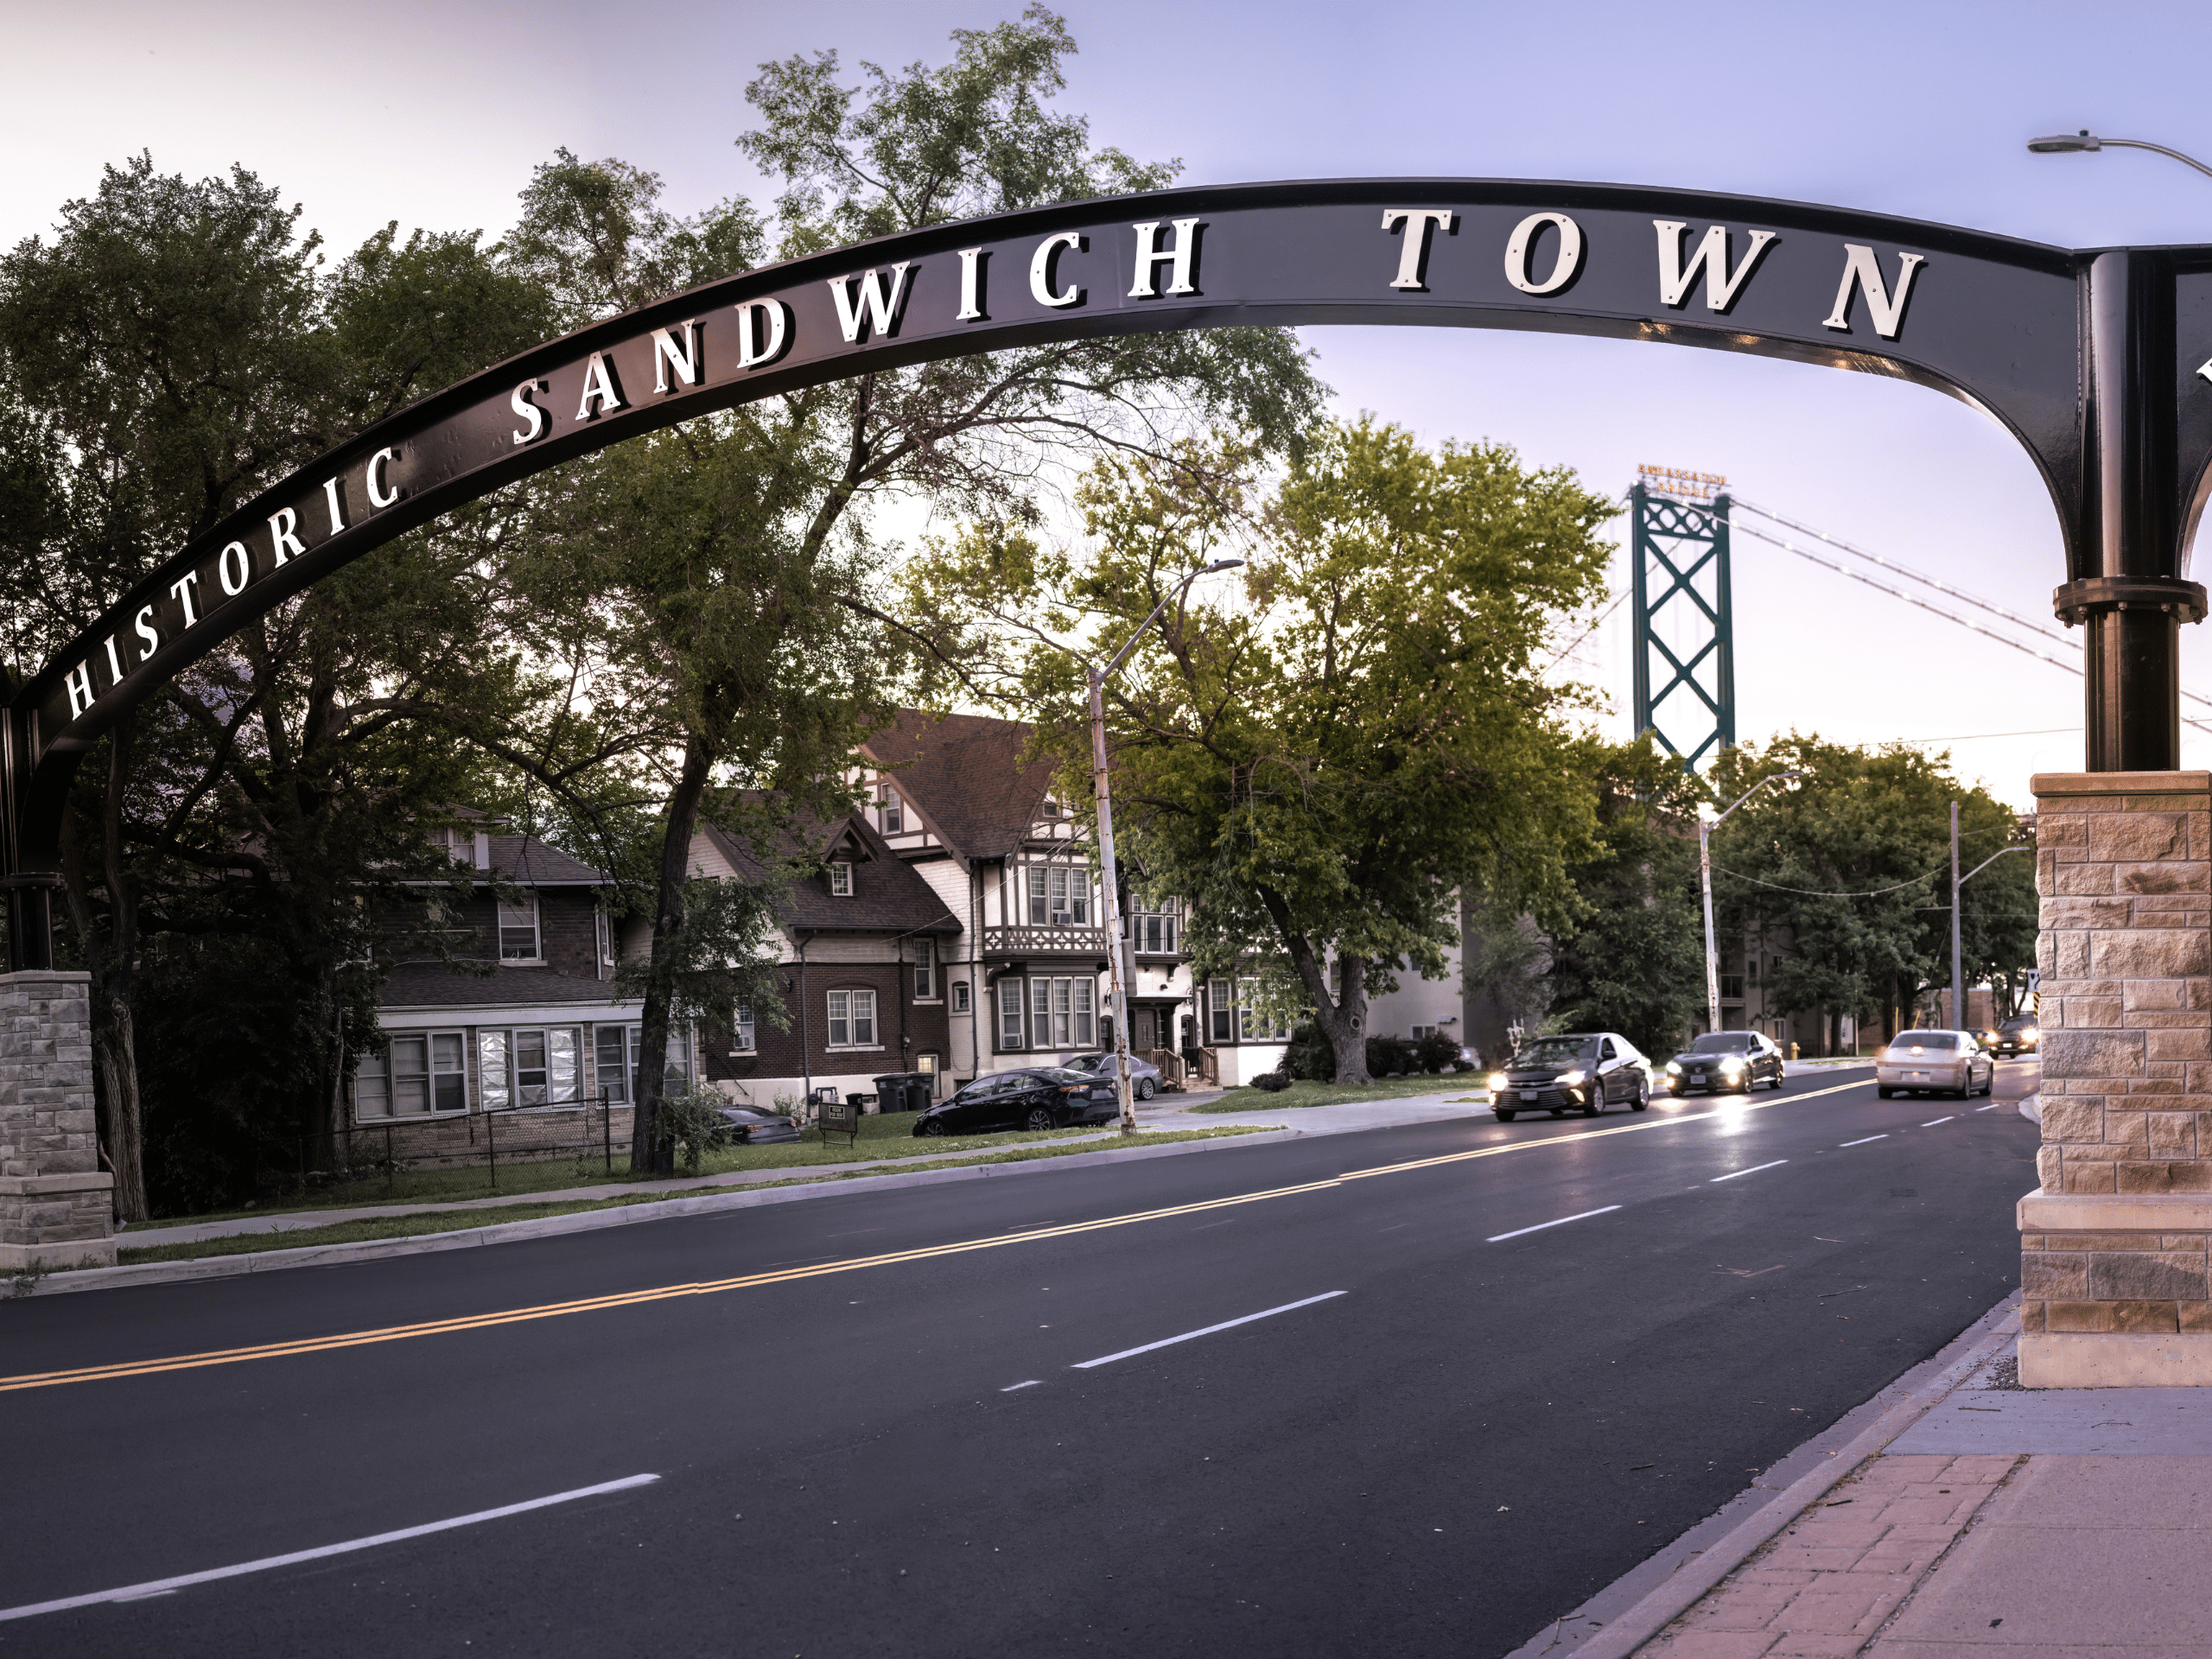 an arch at the entrance to the historic sandwich town